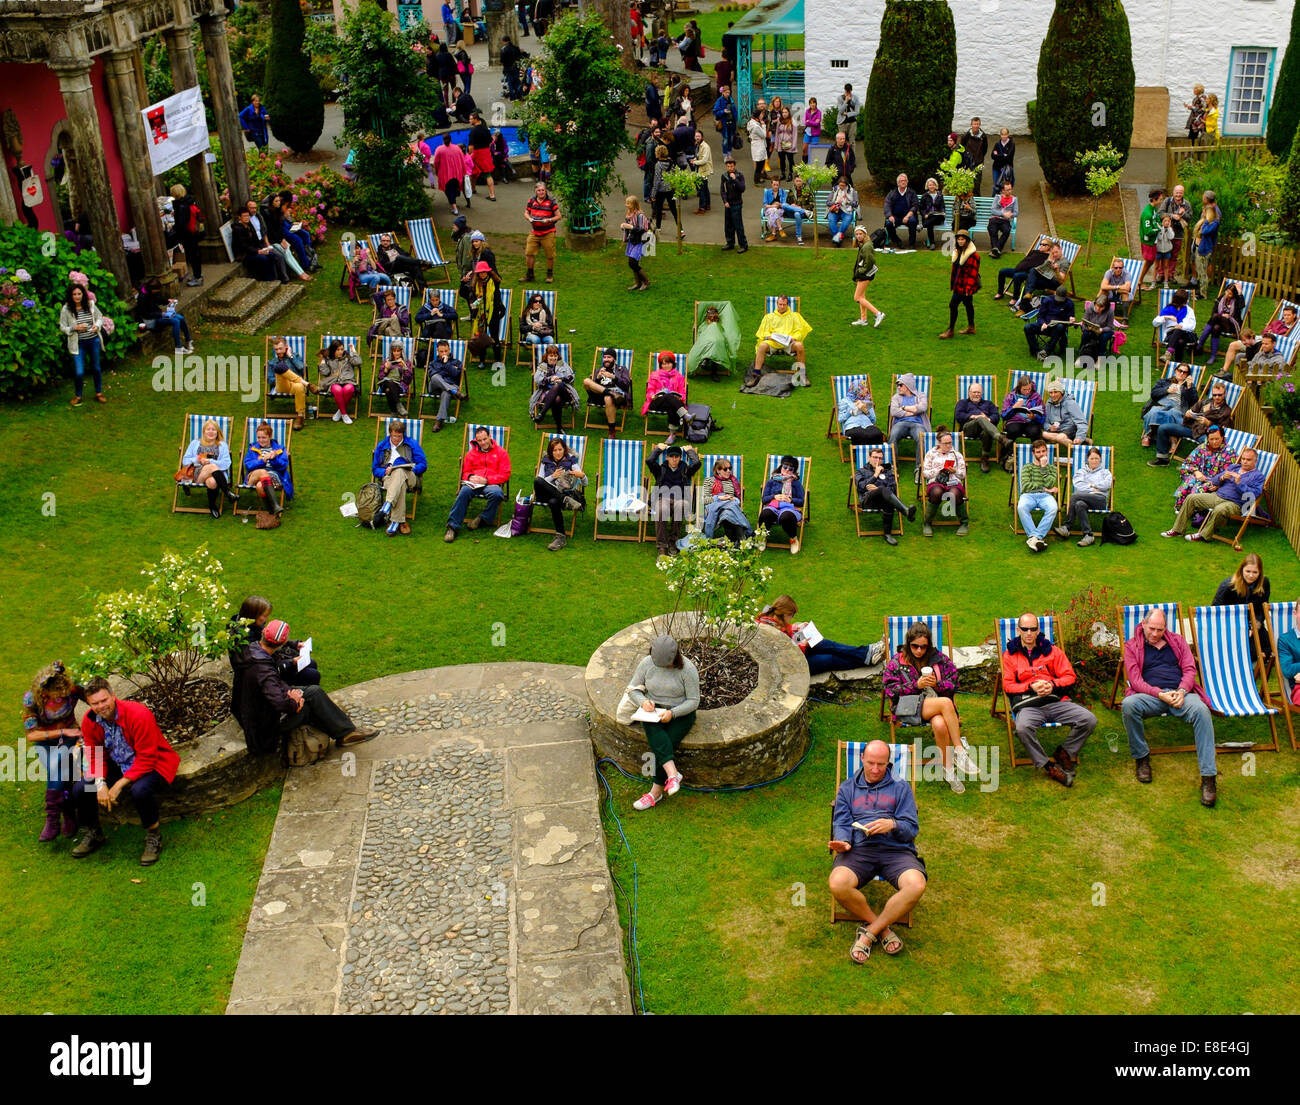 People seated awaiting a performance in the square. 'Festival No.6'. 6th September 2014 in Portmeirion, North Wales, UK. Stock Photo